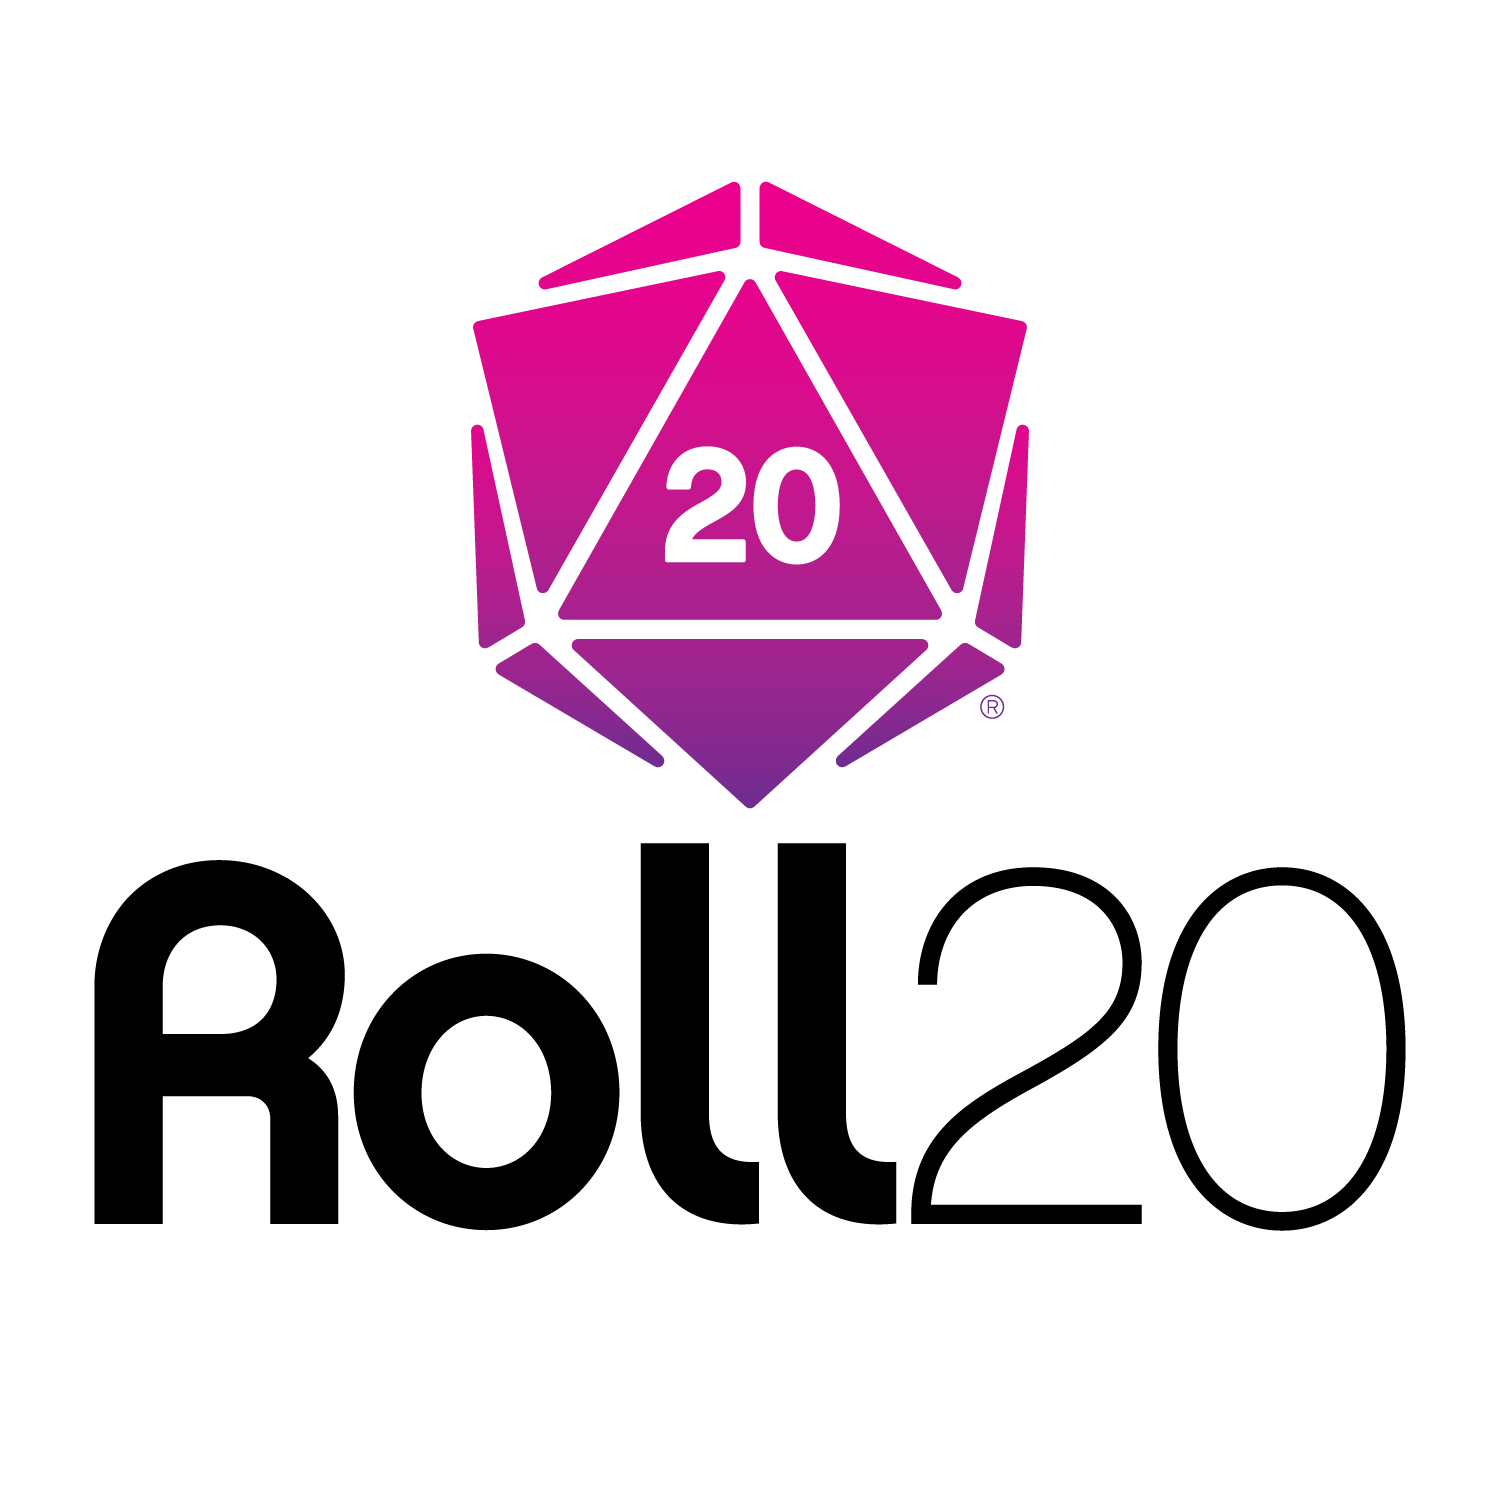 Beacon of Hope | D&D 5th Edition on Roll20 Compendium